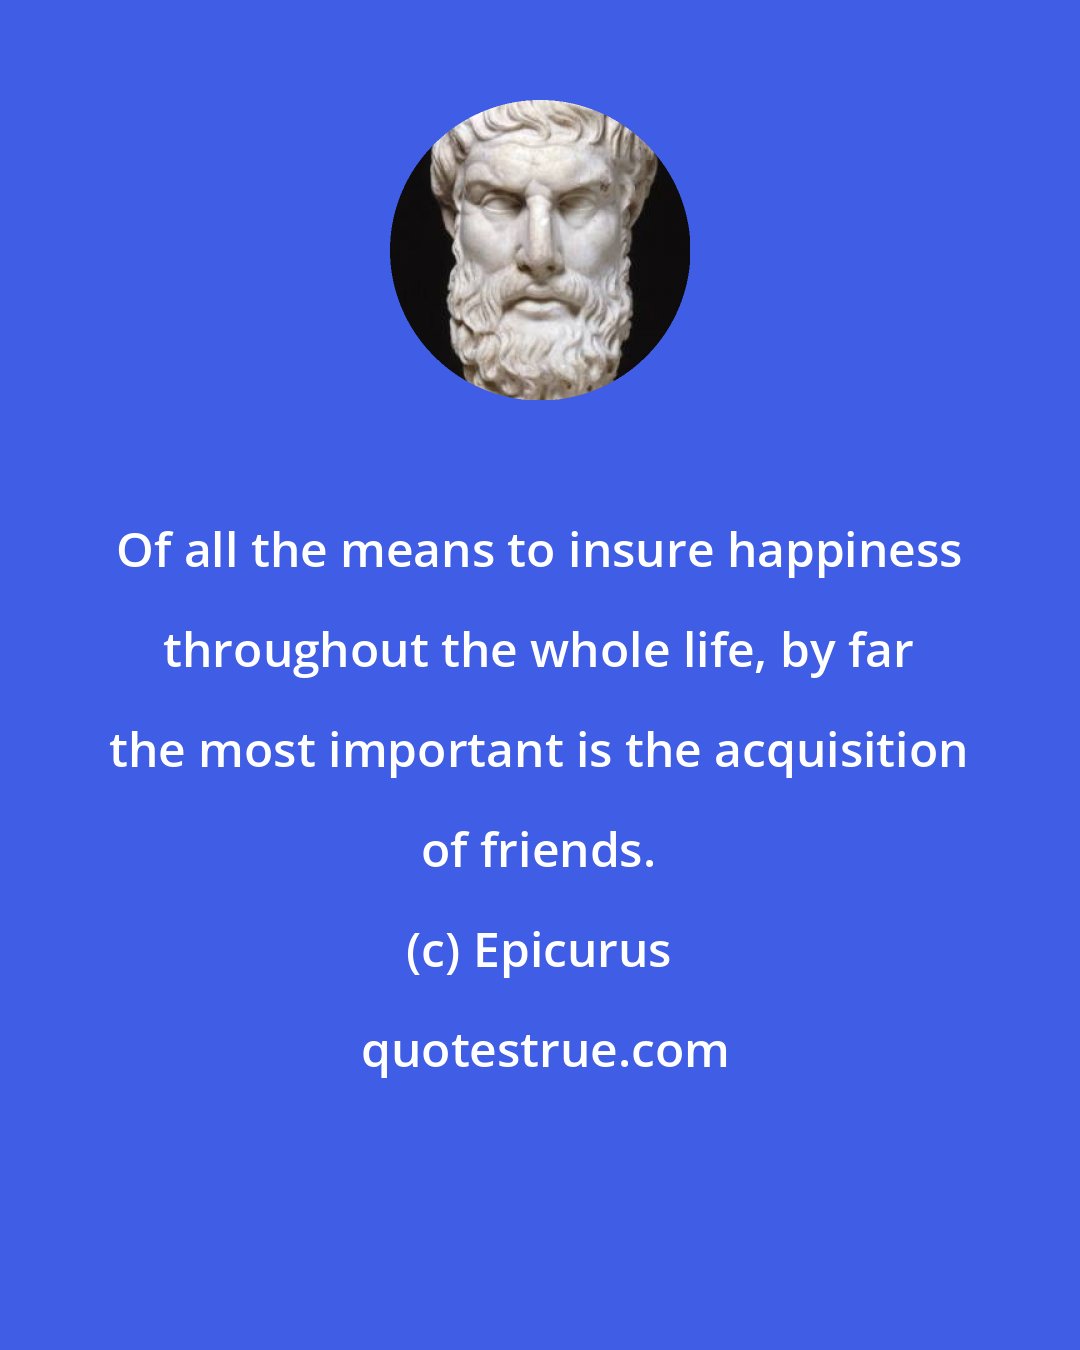 Epicurus: Of all the means to insure happiness throughout the whole life, by far the most important is the acquisition of friends.